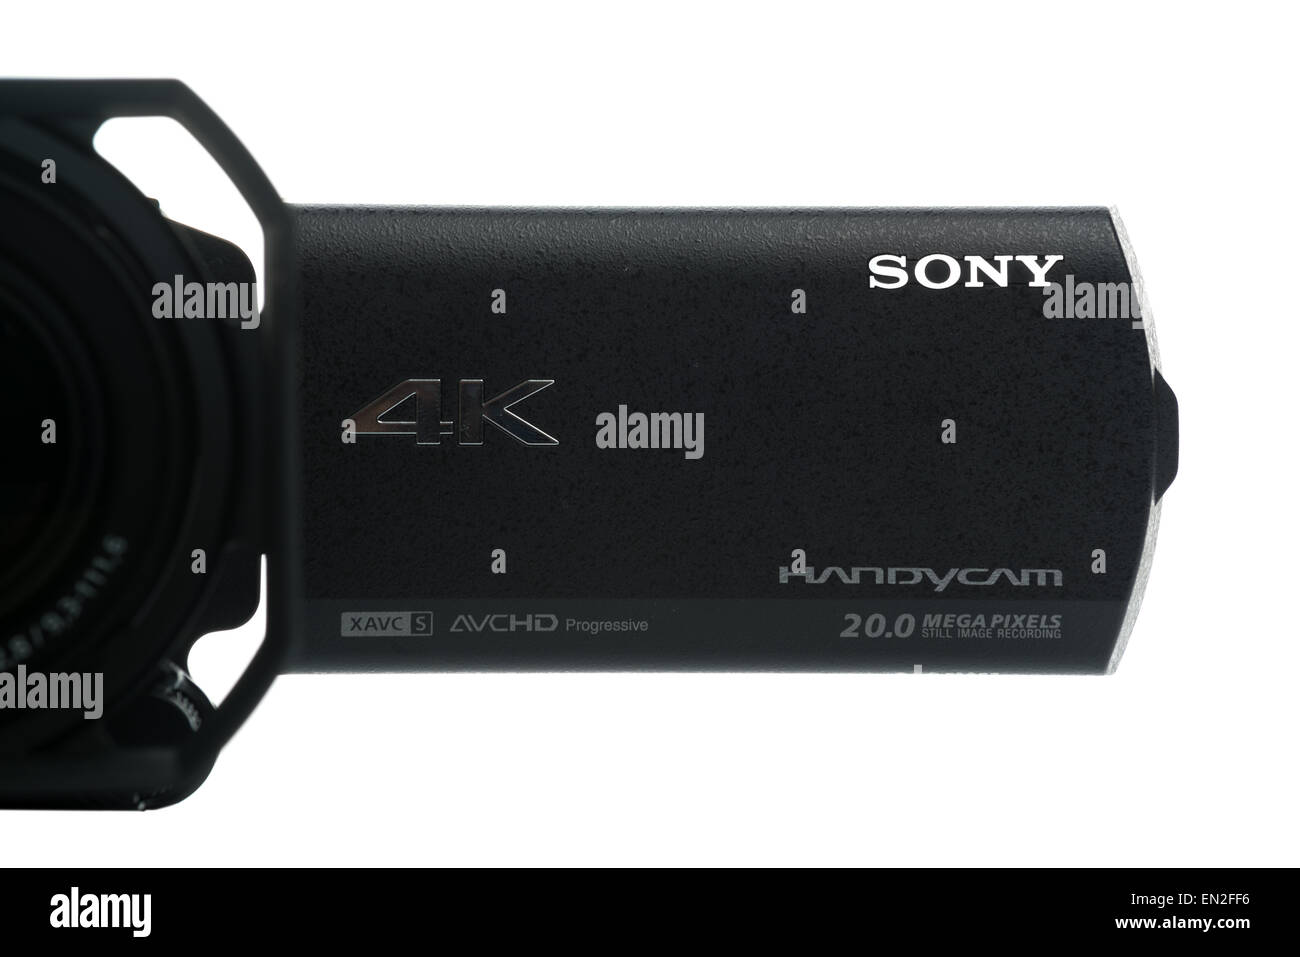 NOVI SAD, SERBIA - APRIL 25, 2015: Sony FDR AX100 4k Handycam Camcorder (announced in 2014.) captures Ultra High Definition Foot Stock Photo